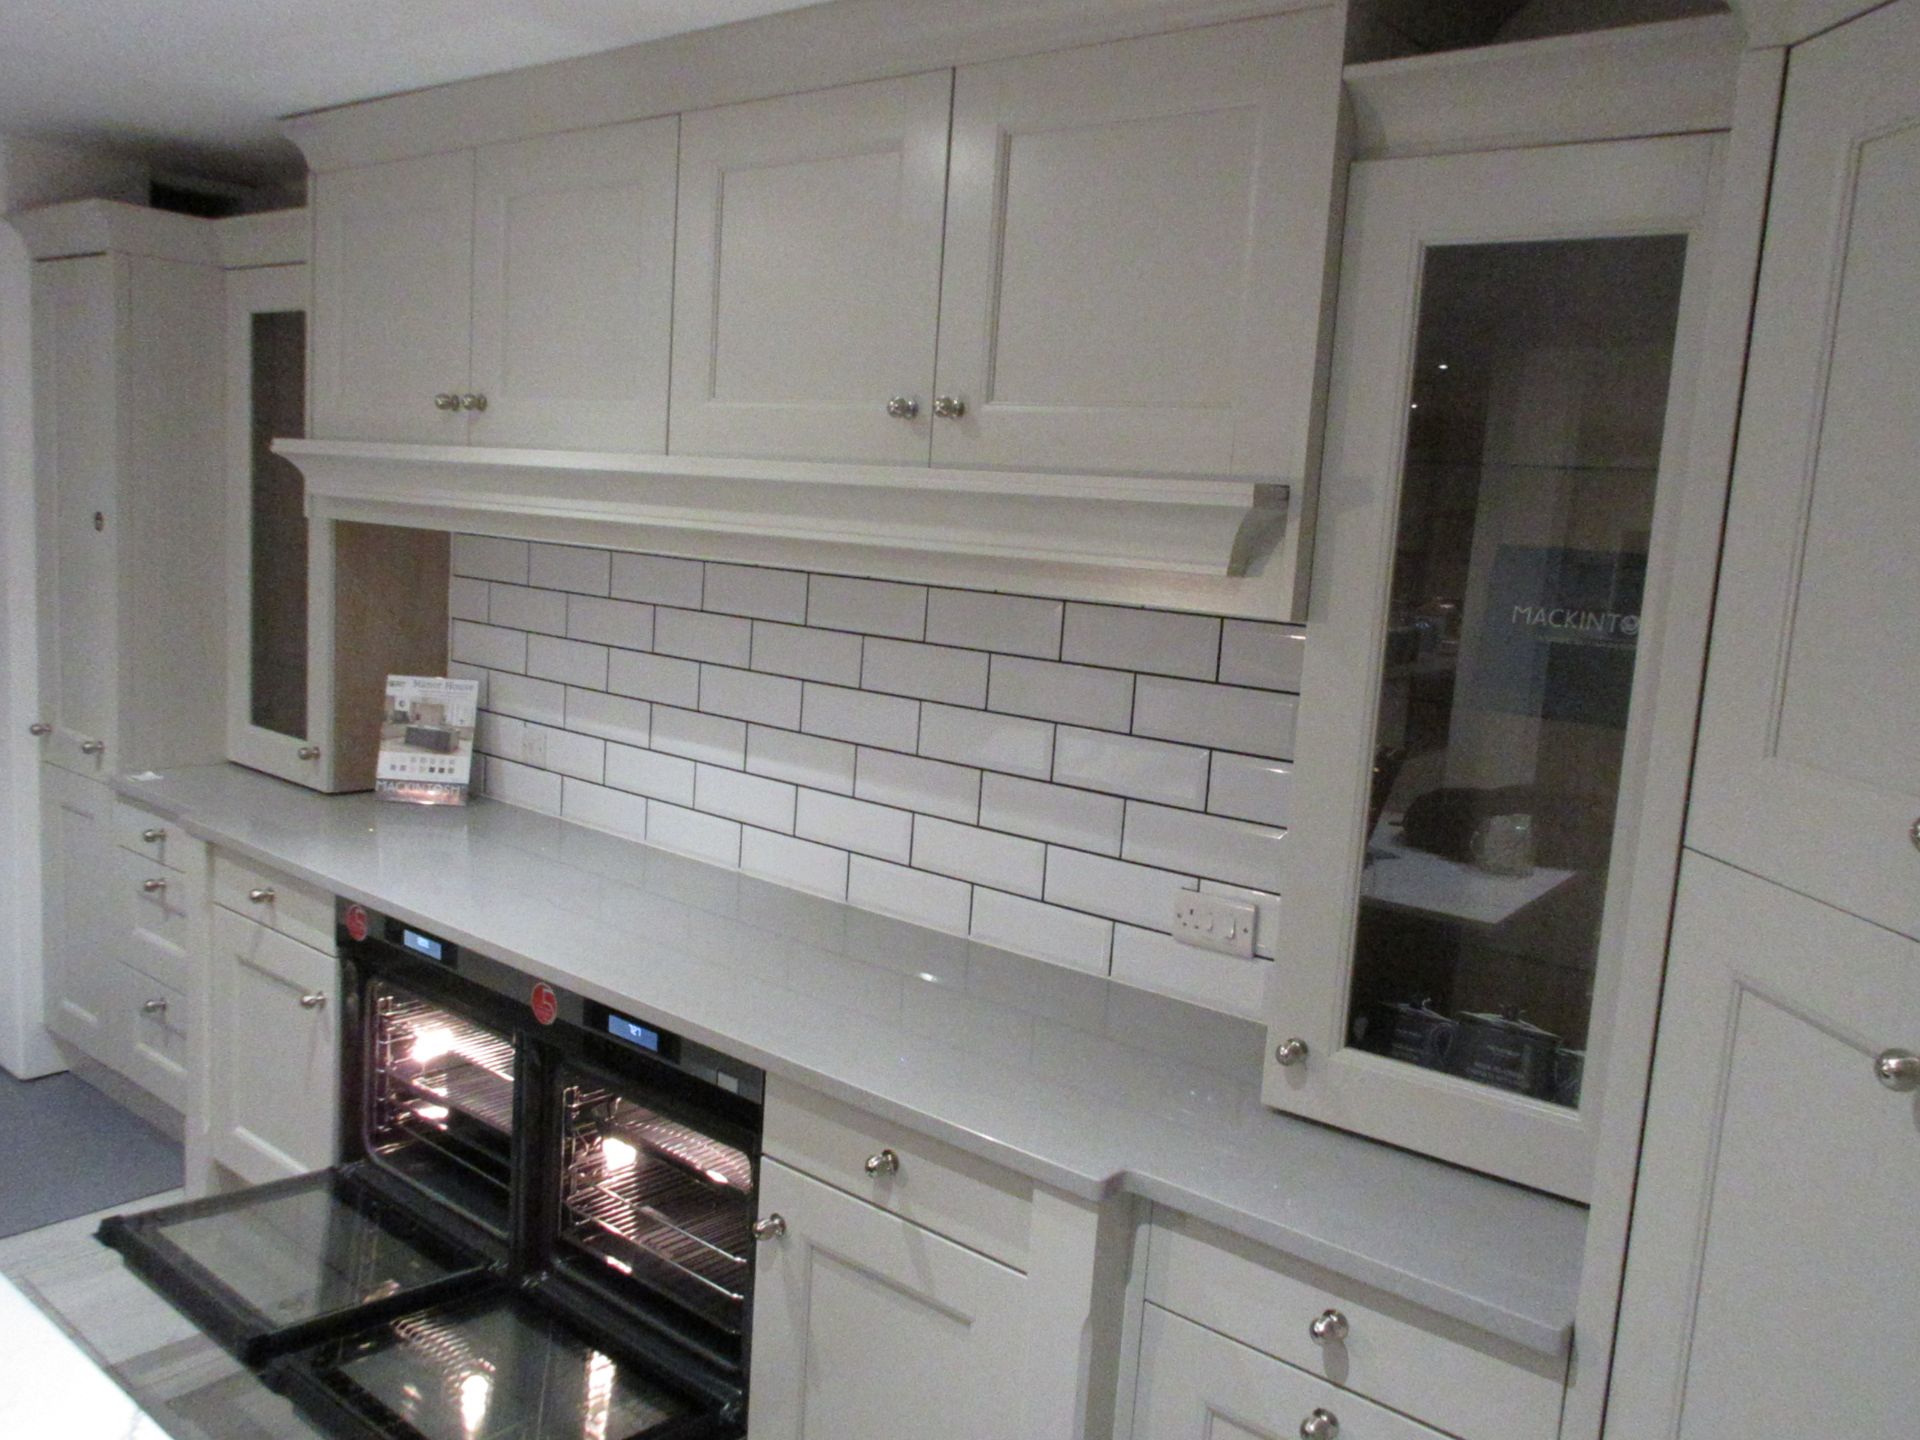 Mackintosh Manor House showroom display kitchen comprising of: - 2 x AEG ovens, type 71BLF05AG, - Image 3 of 29